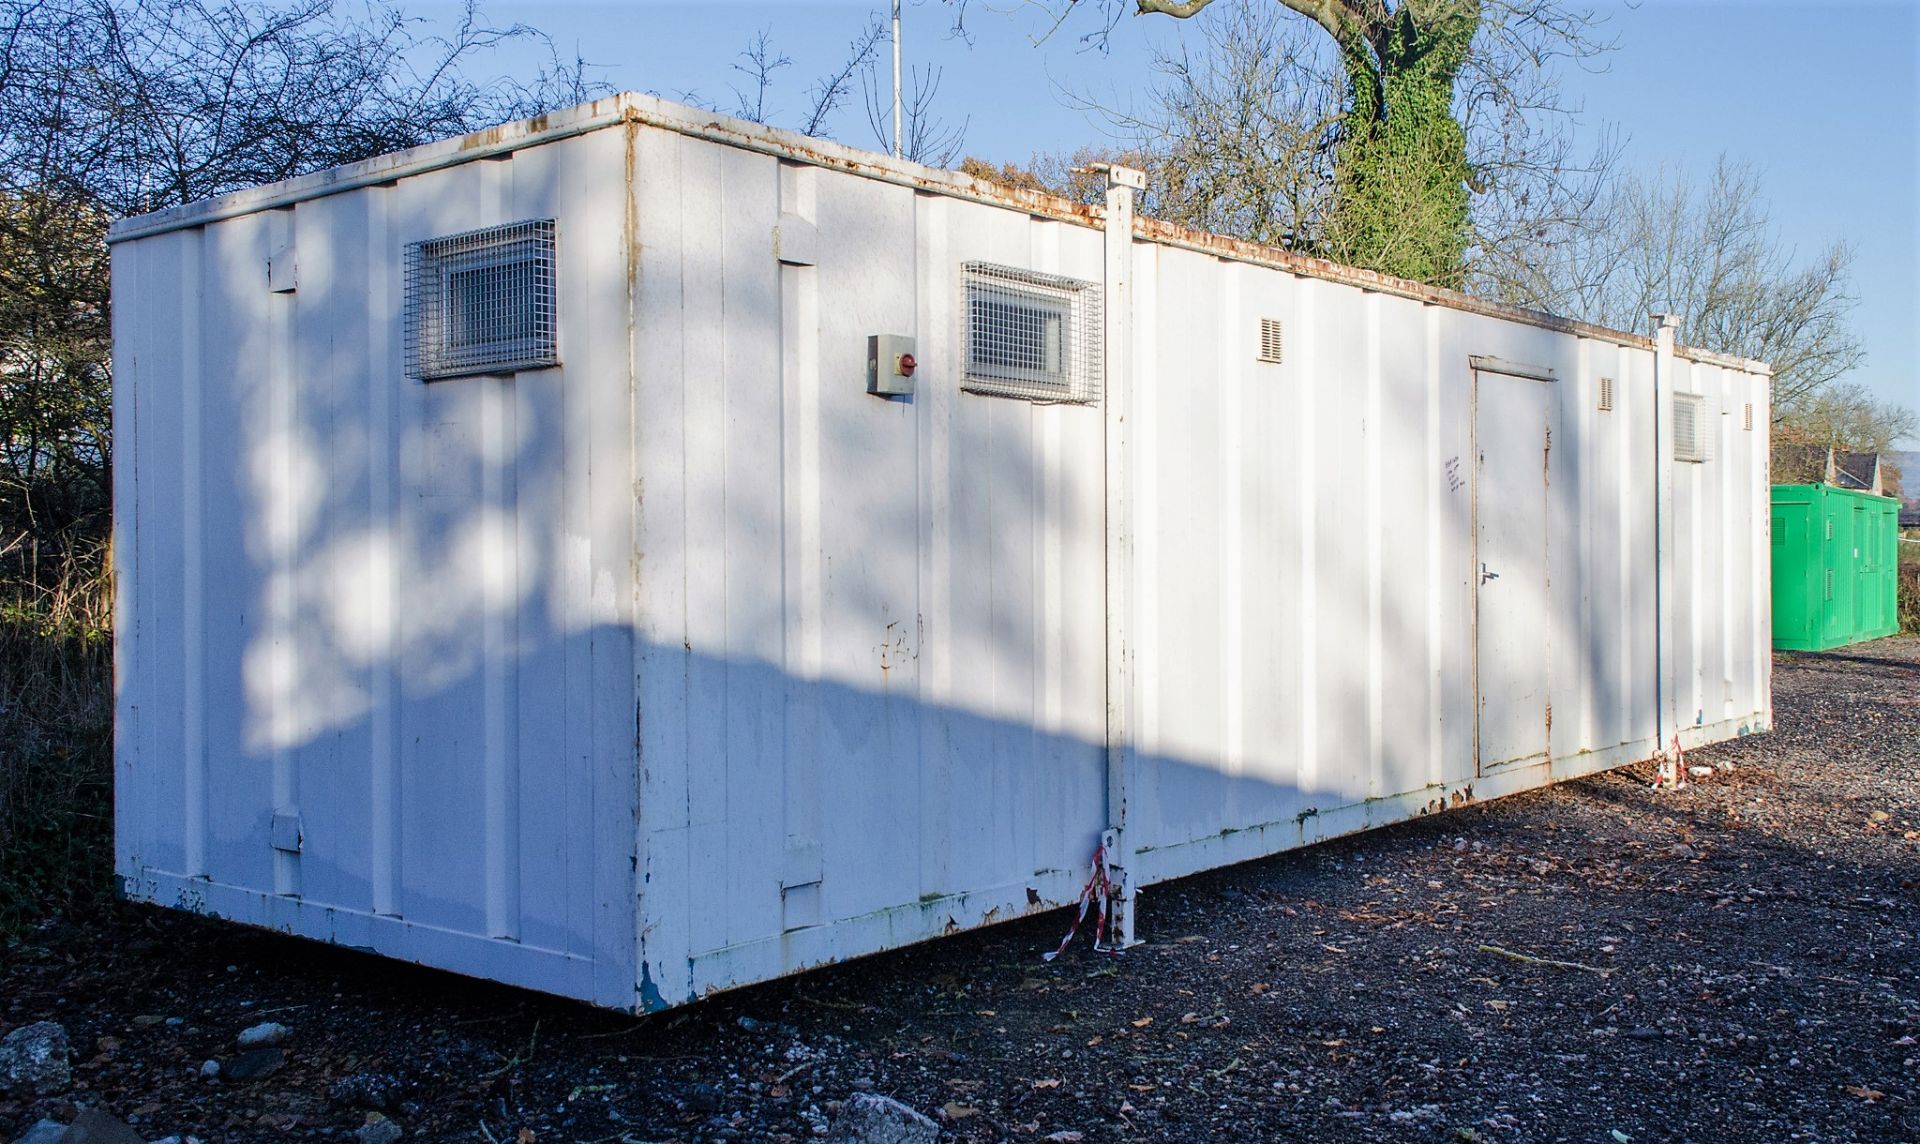 32ft x 9ft steel anti vandal shower site unit Comprising of 8 shower cubicles & changing area c/w